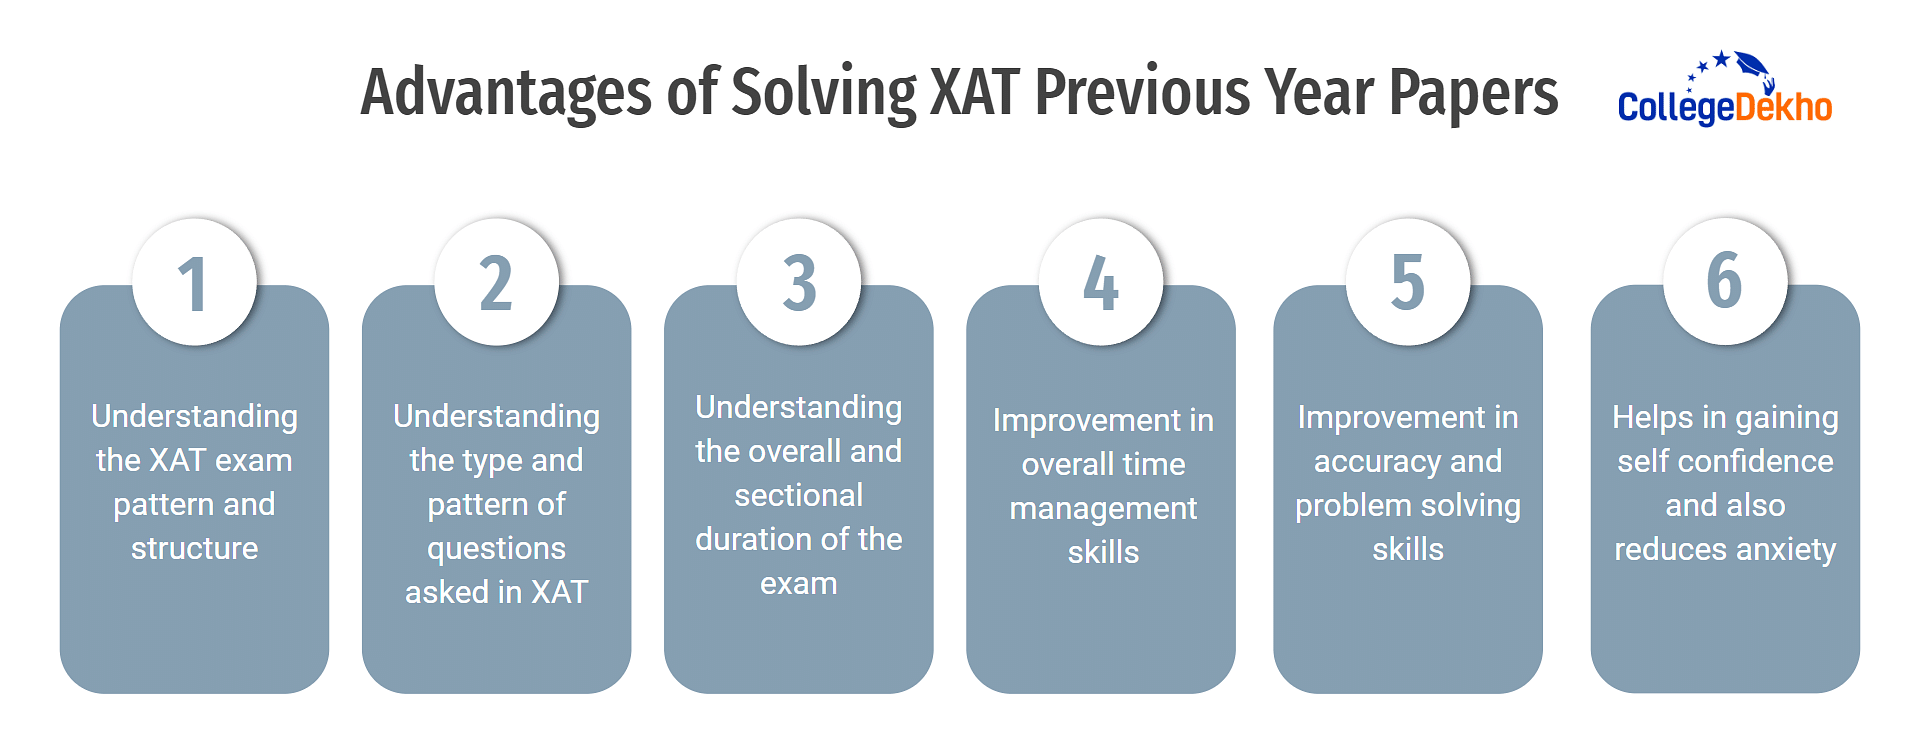 Advantages of Solving XAT Previous Year Papers